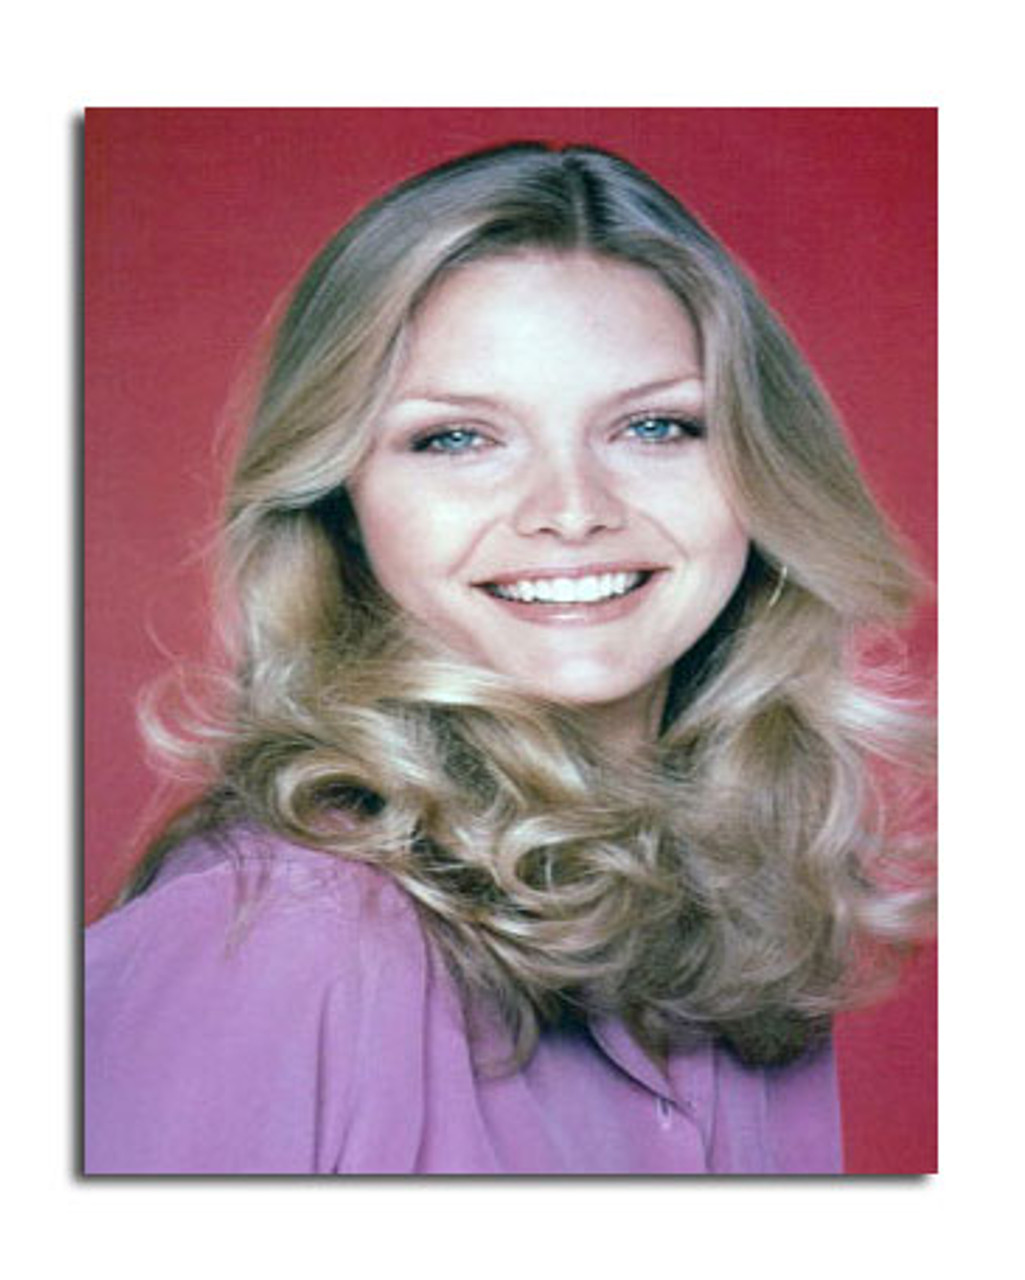 Movie Picture Of Michelle Pfeiffer Buy Celebrity Photos And Posters At